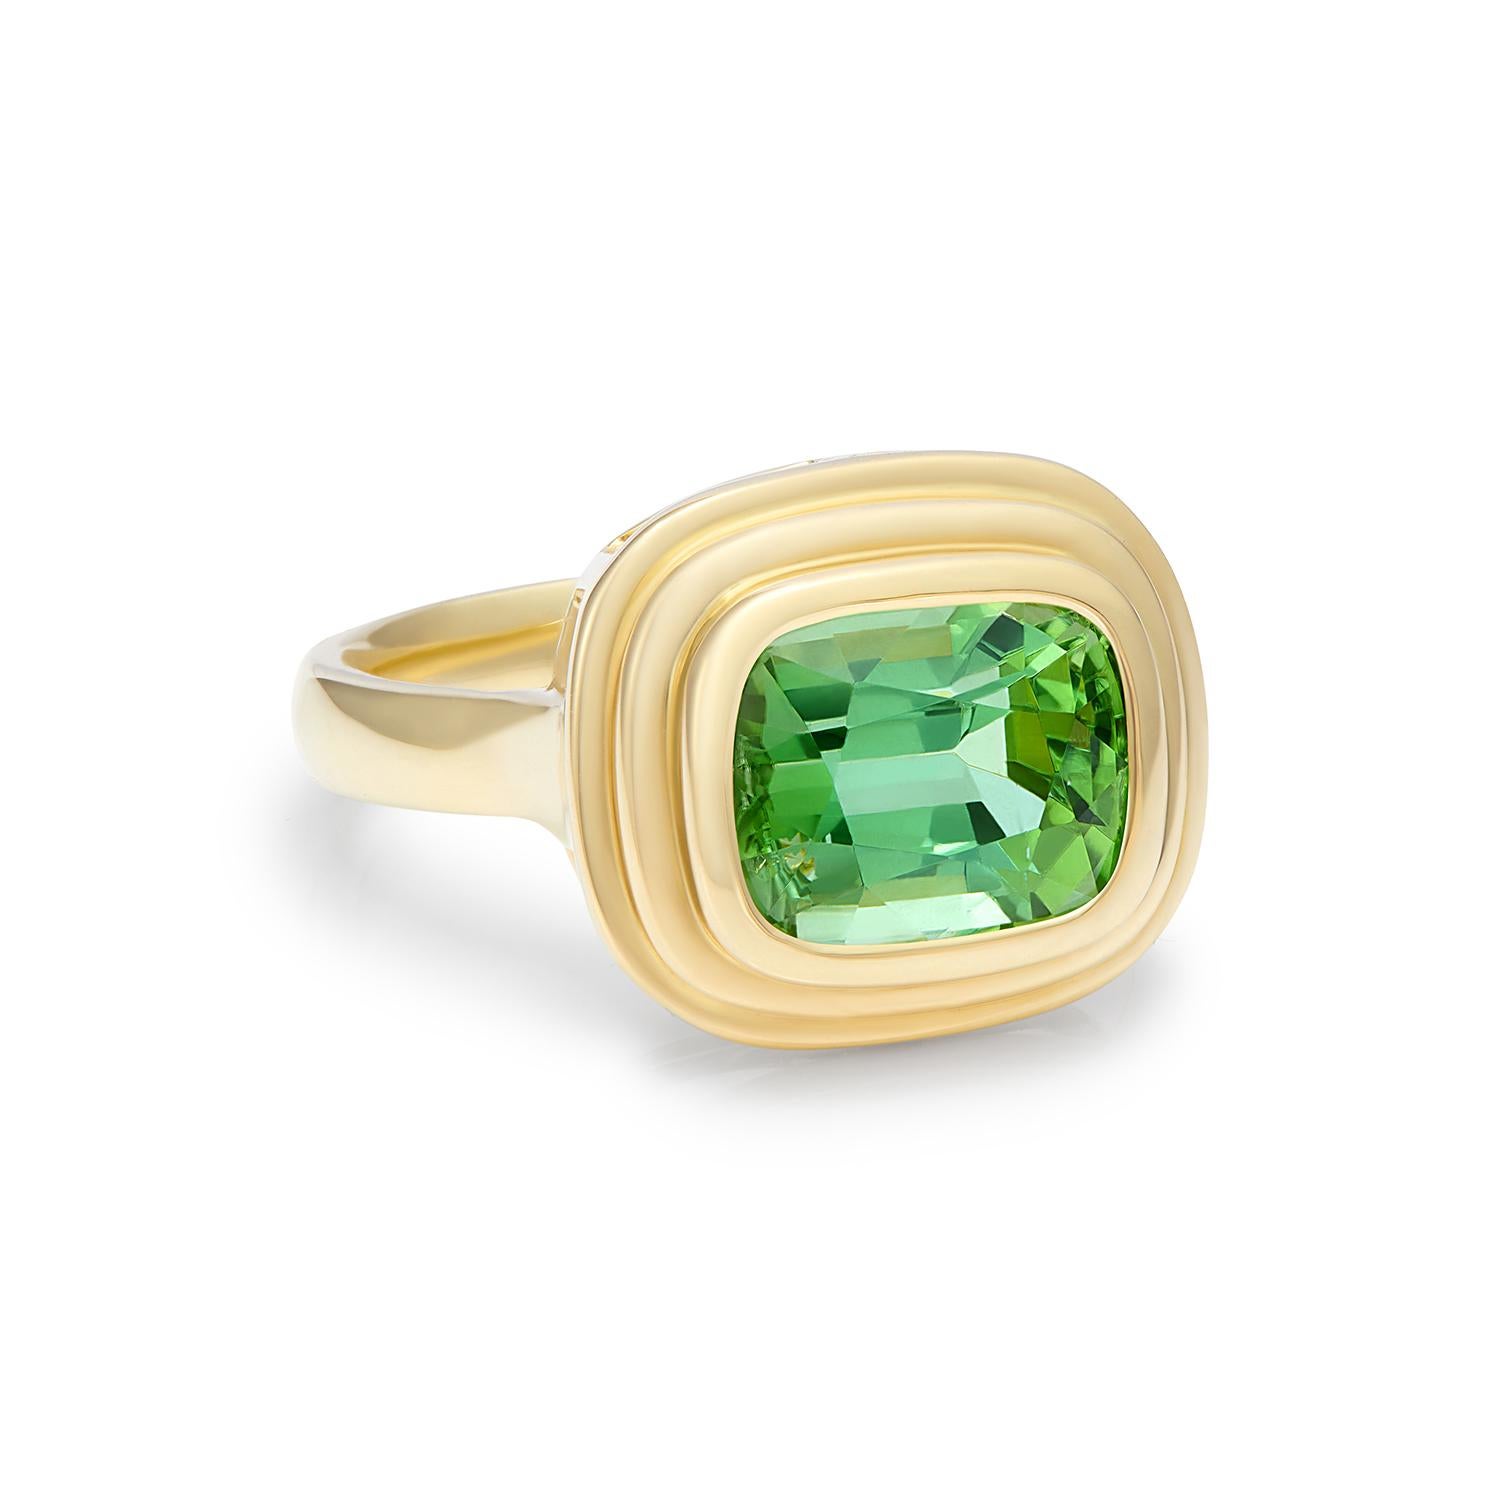 3.68 carat Green Tourmaline ring set in 18 karat yellow gold. This beautiful green Tourmaline is a vivid green colour in a wonderful statement size, forever changing in different lights. Each piece of this collection is unique due to the rarity of